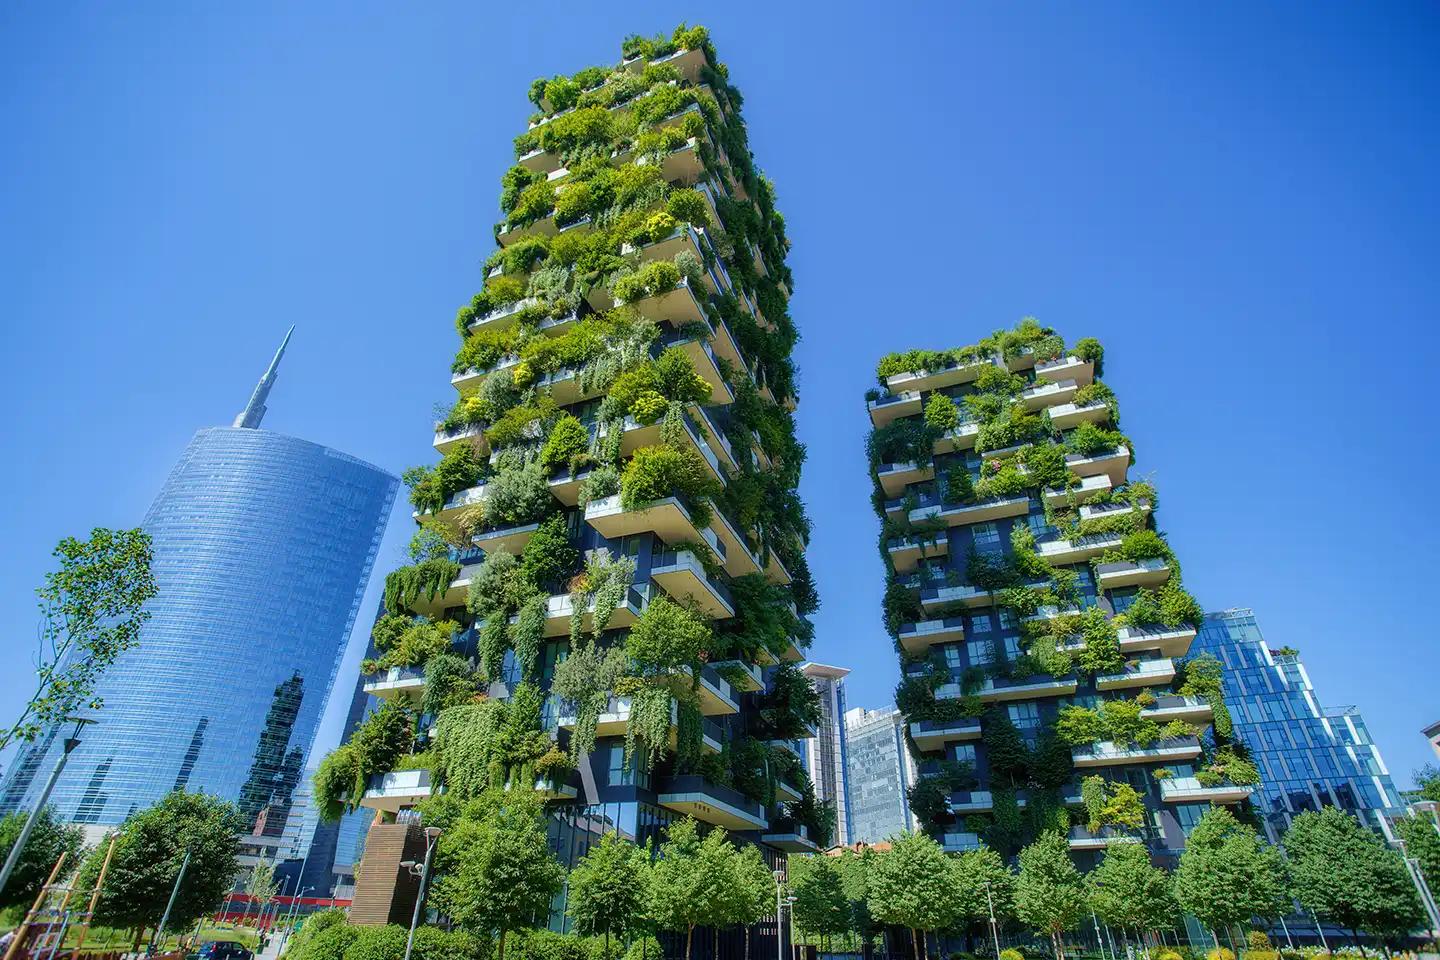 Plants in Architecture: Bosco Verticale (Vertical Forest), Milan, Italy